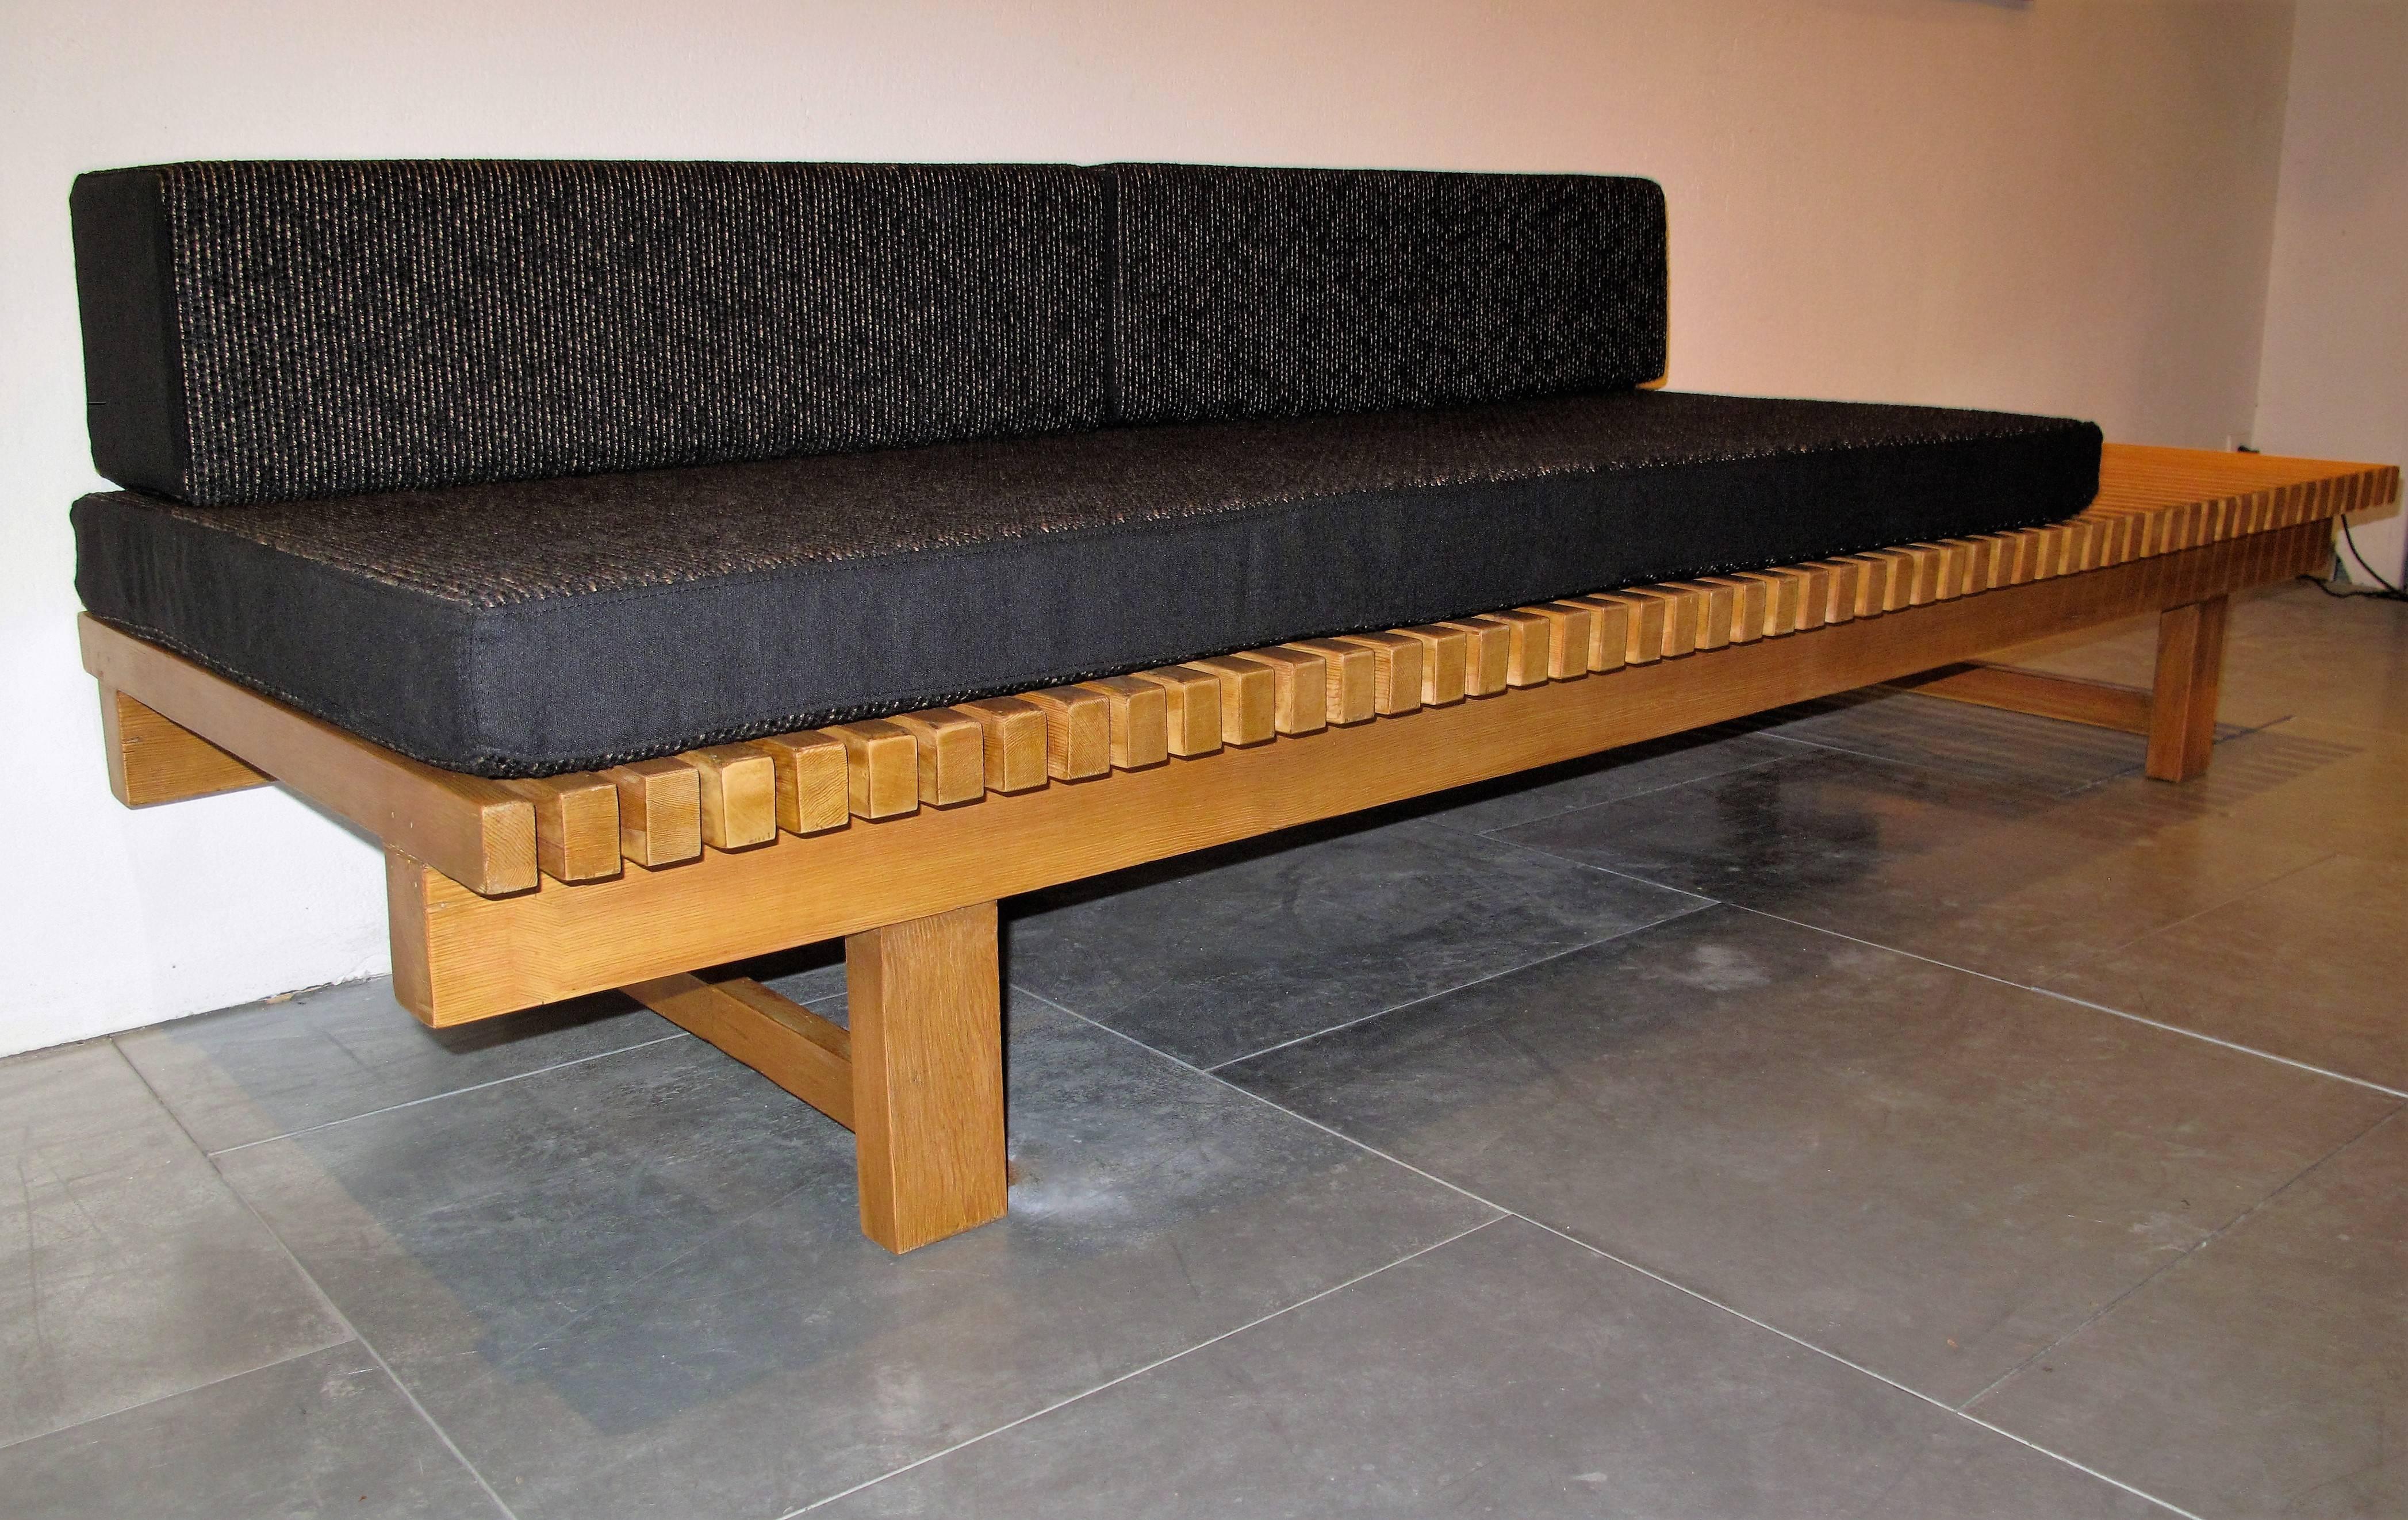 Charlotte Perriand.
A Japanese duckboard sofa daybed from the Arcs ski resort 1968 in larch and ashwood
coming from the three arcs.